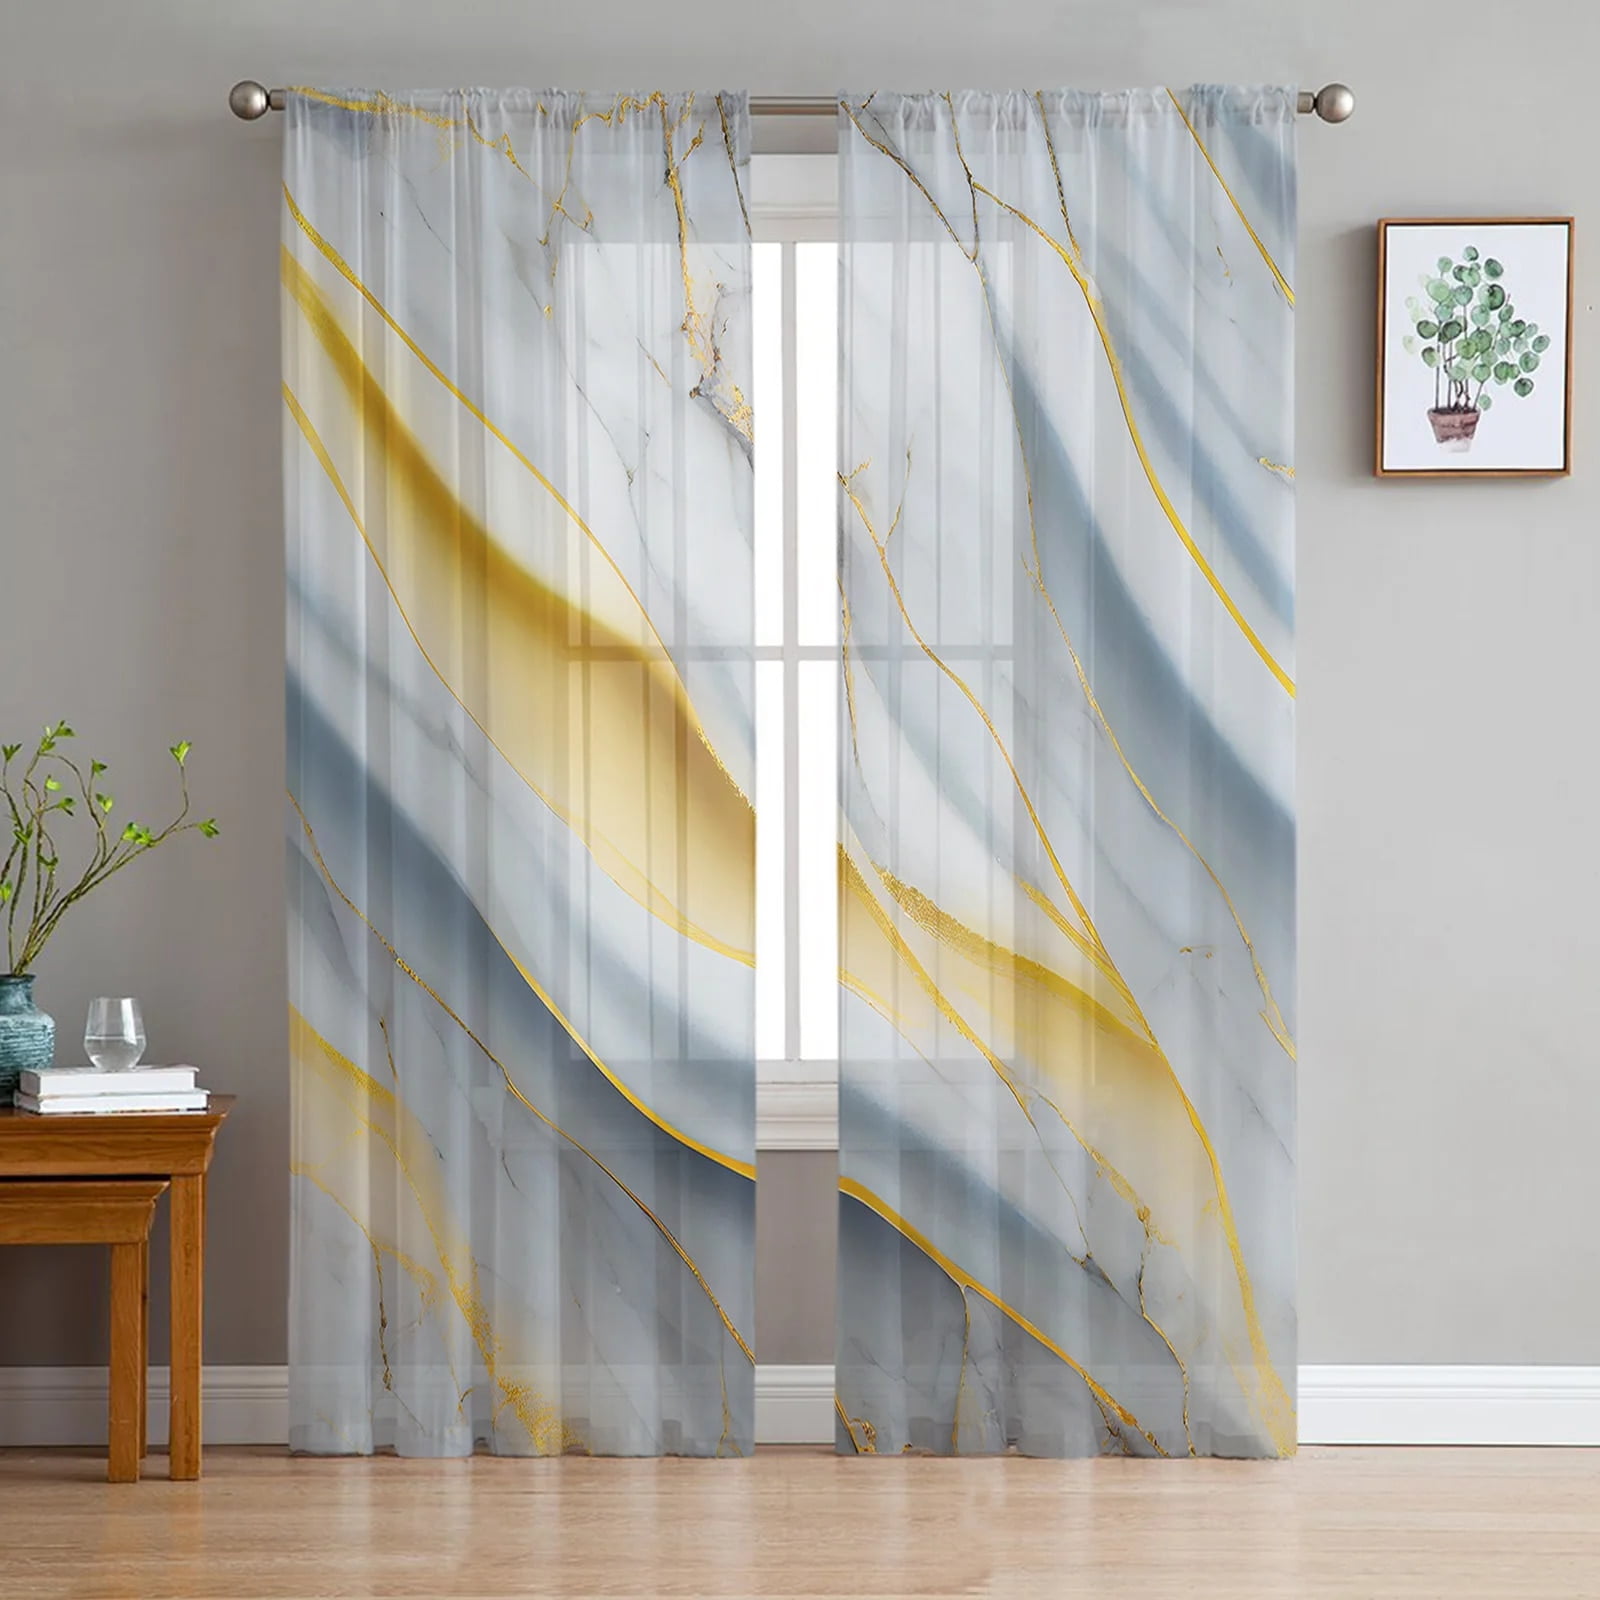 Marble Line Aqua Tulle Curtains for Living Room Bedroom Voile Sheer ...